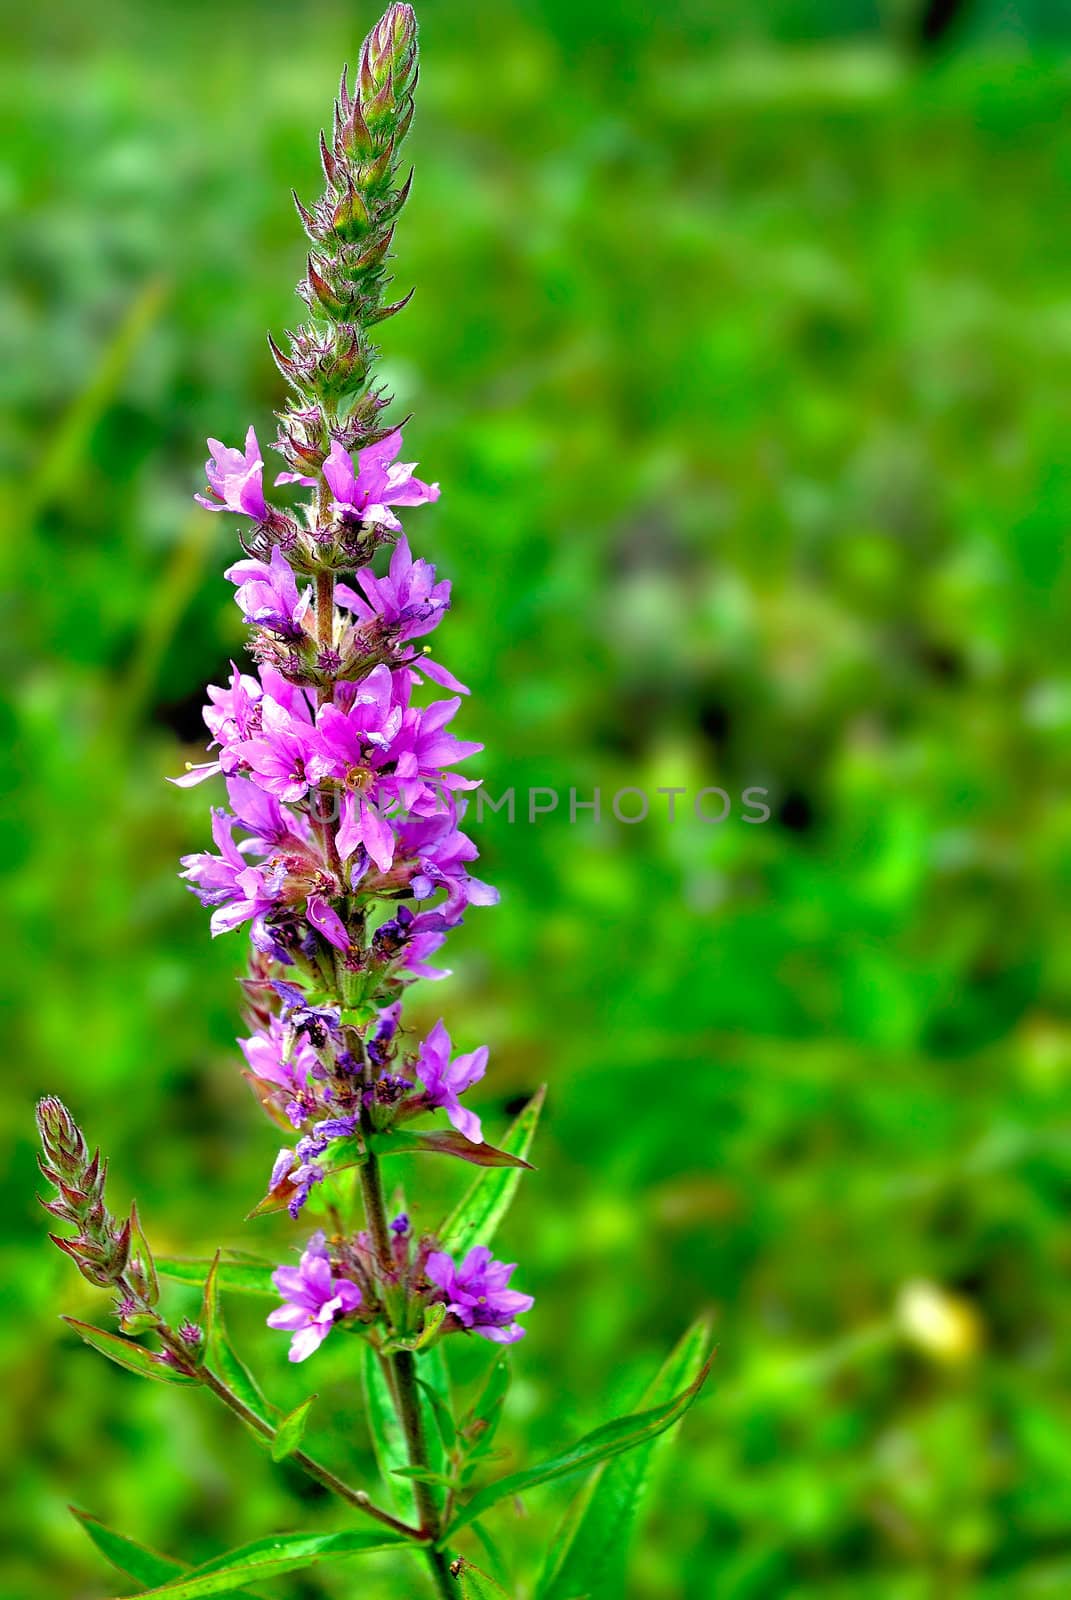 Willow-herb blossoms in the summer on a soft background of green grass